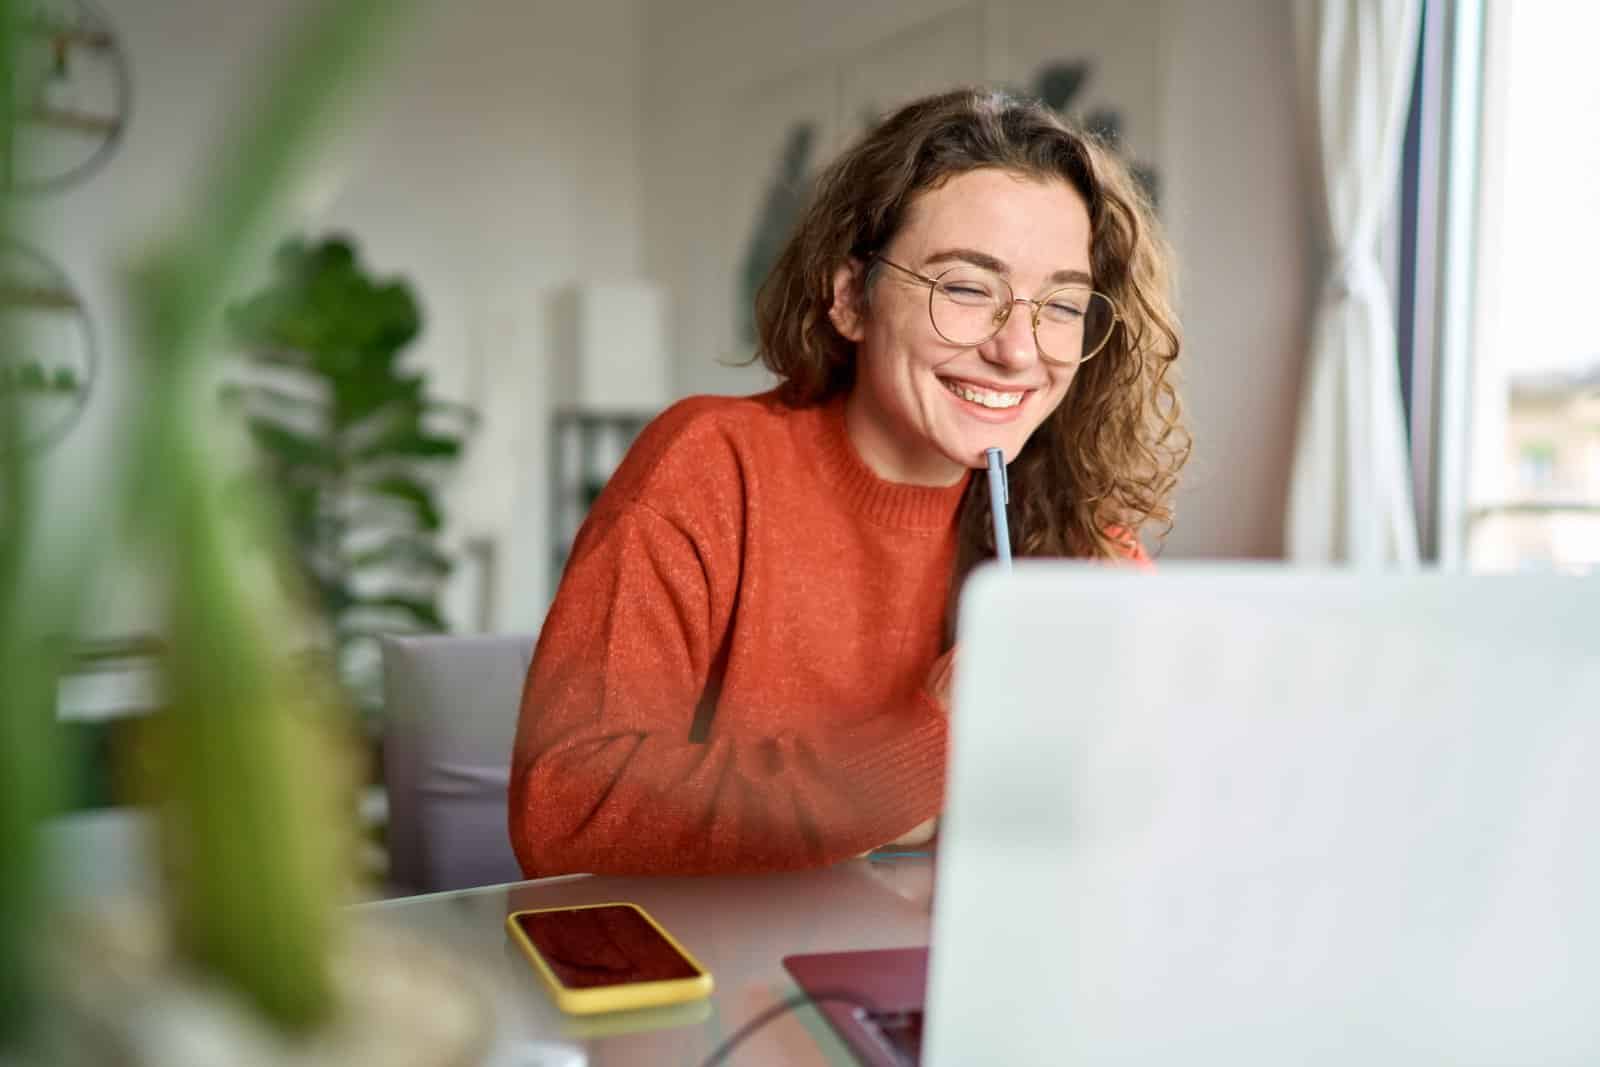 Image Credit: Shutterstock / insta_photos <p>Tired of commuting and craving work flexibility? You’re not alone. Many companies now offer remote work, benefiting both employees and employers. Ever wondered how this shift could enhance your work-life balance? <strong><a href="https://wealthyliving.com/work-from-anywhere-19-companies-still-supporting-remote-work/" rel="noopener">Work from Anywhere: 19 Companies Still Supporting Remote Work</a></strong></p> <p><span>The post</span> – <a href="https://libertyandwealth.com/indiana-set-to-gain-2-billion-google-ai-and-cloud-computing-hub/">Indiana Set to Gain $2 Billion Google AI and Cloud Computing Hub</a> –<span> first appeared on </span><a href="https://libertyandwealth.com/"><span>Liberty & Wealth</span></a><span>.</span></p> <p>Featured Image Credit: Shutterstock / VDB Photos.</p> <p><span>The content of this article is for informational purposes only and does not constitute or replace professional financial advice.</span></p>